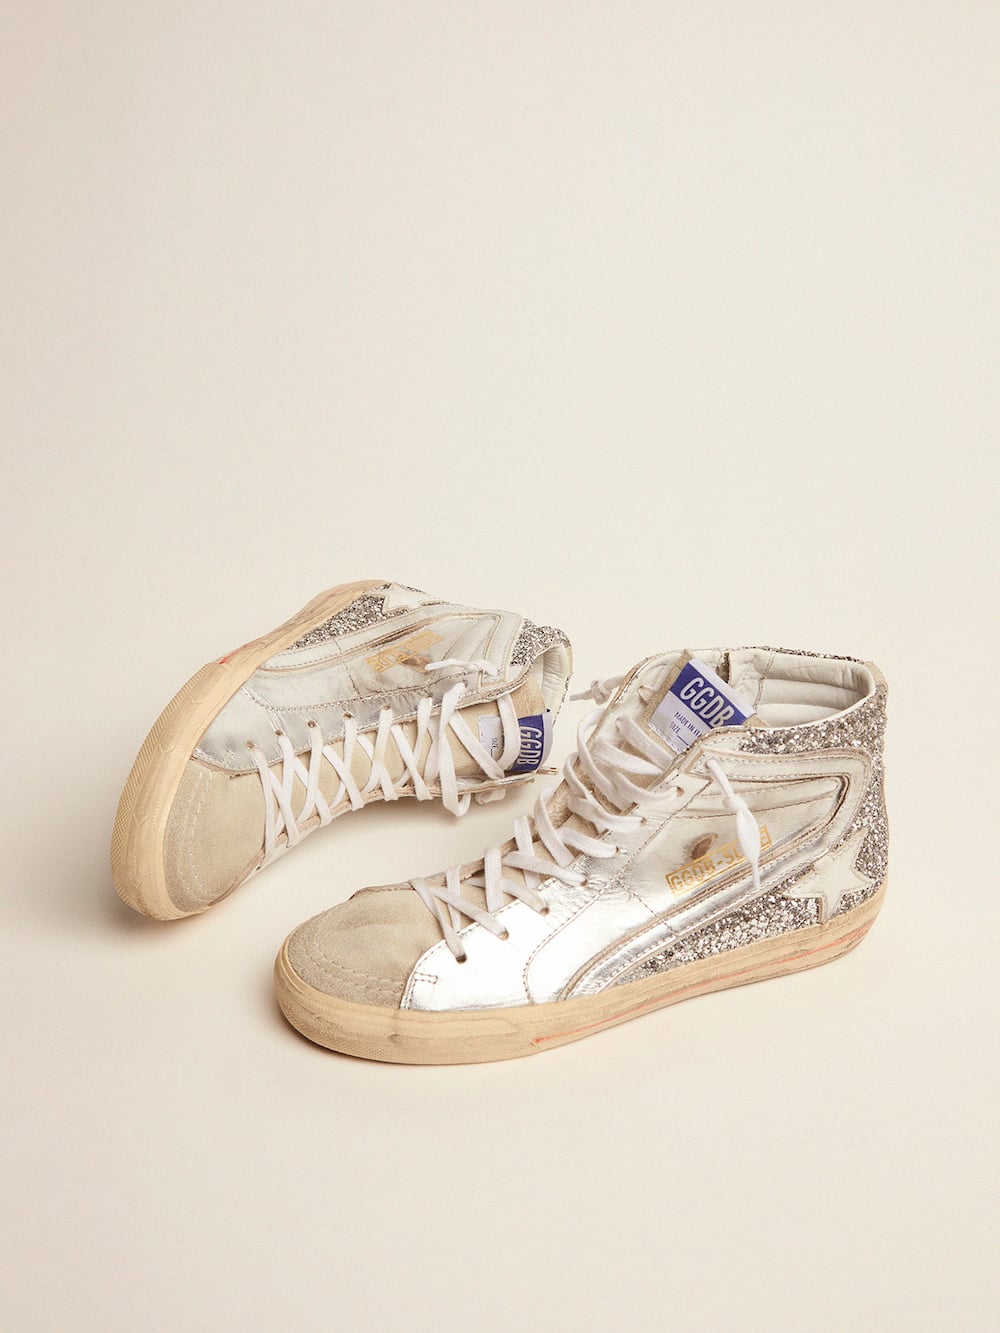 Golden Goose - Women's Slide with laminated leather upper and silver glitter in 